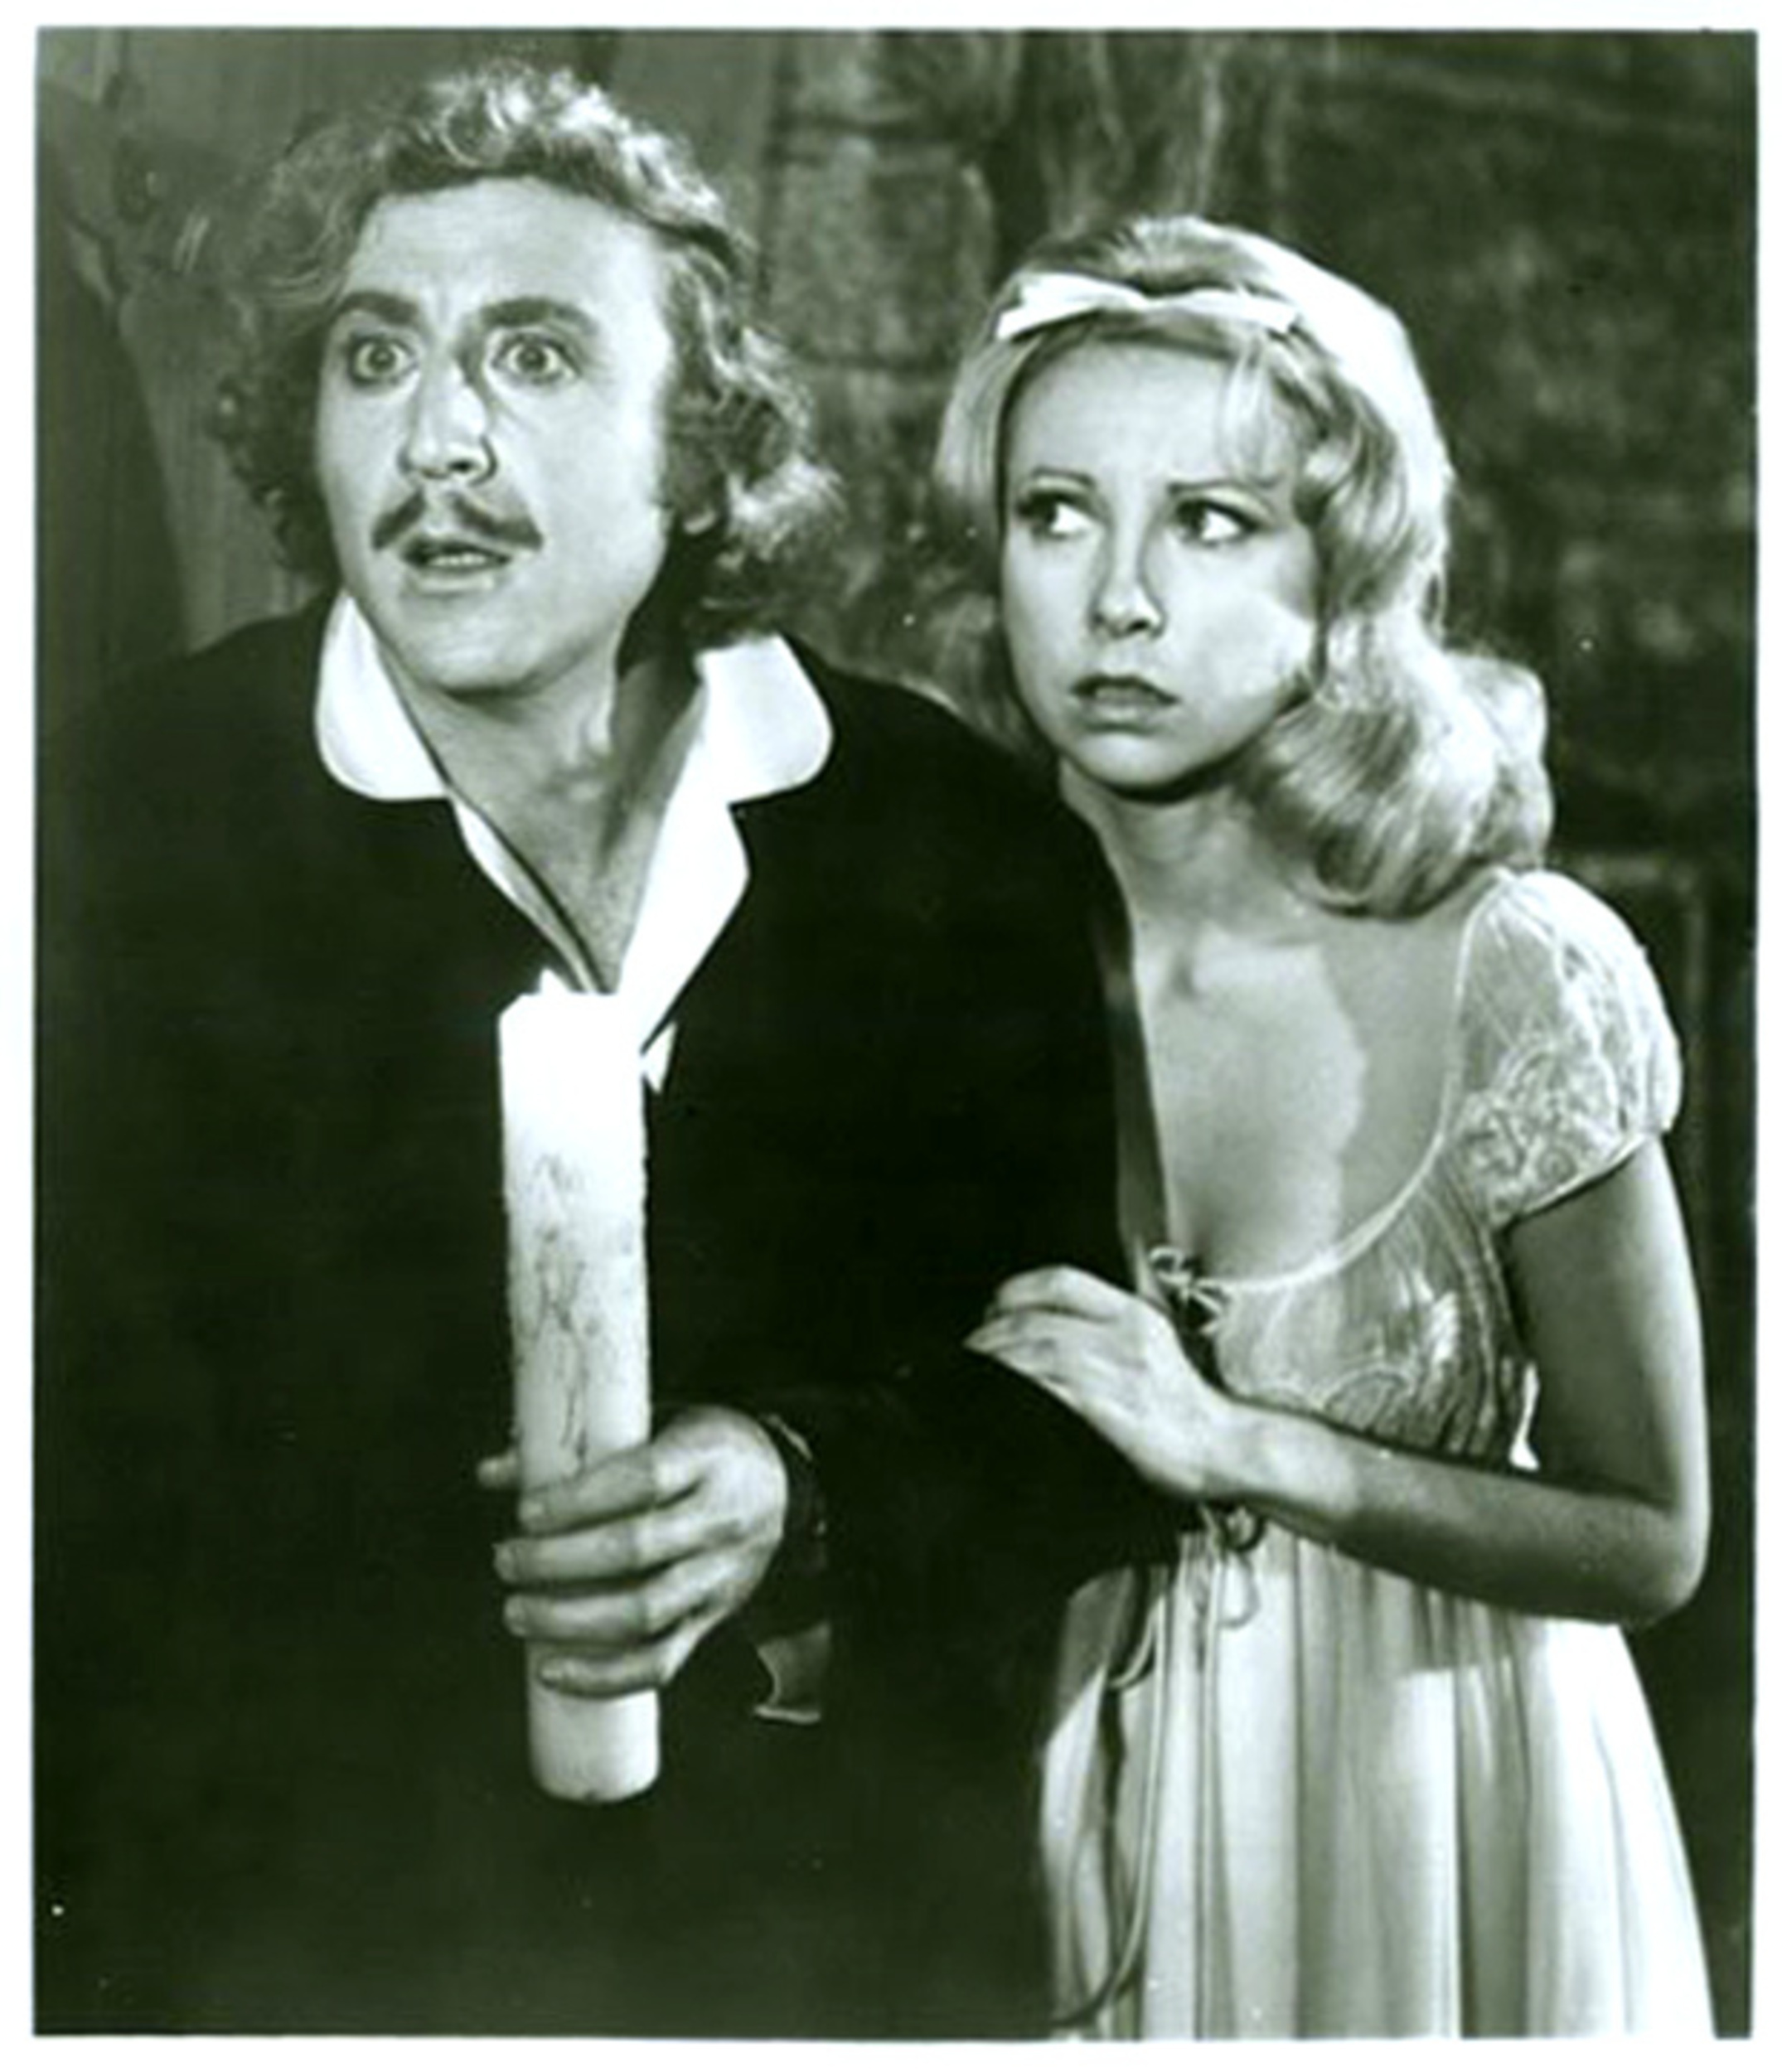 <p>If you could have both Teri Garr and Madeline Kahn in your film, you make it happen. Originally, Kahn was going to play Inga the assistant, while Garr had auditioned for the role of Elizabeth, Frederick’s fiancée. However, Kahn decided she would rather play Elizabeth. Brooks asked Garr if she could come in and audition for Inga with a German accent, and Garr responded by jumping right into the (admittedly broad) German accent she uses in the film. Brooks gave her the part.</p><p><a href='https://www.msn.com/en-us/community/channel/vid-cj9pqbr0vn9in2b6ddcd8sfgpfq6x6utp44fssrv6mc2gtybw0us'>Follow us on MSN to see more of our exclusive entertainment content.</a></p>